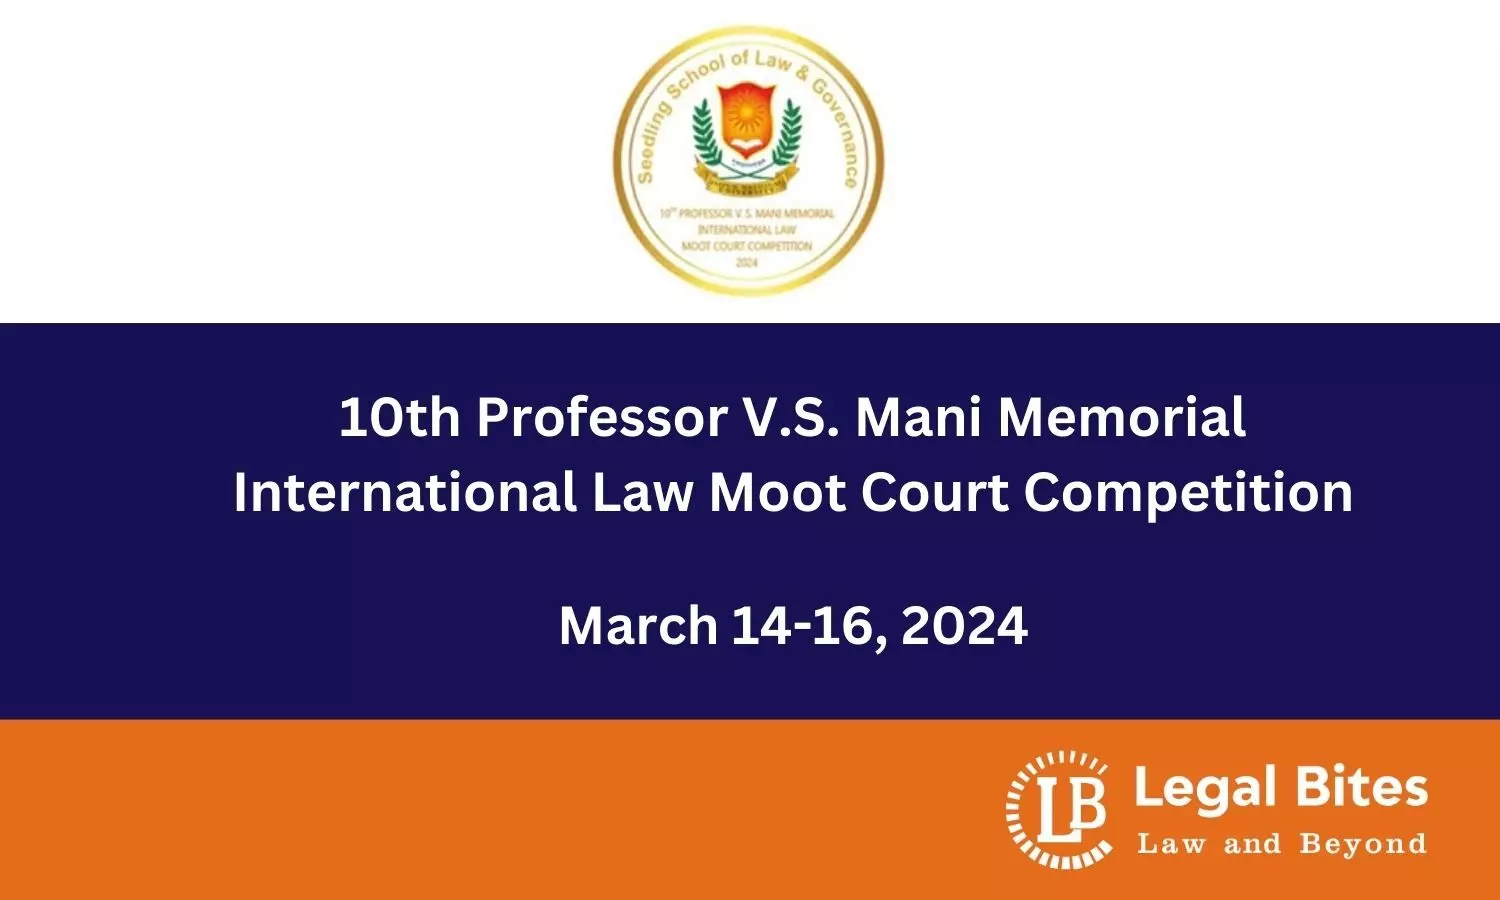 10th Professor V.S. Mani Memorial International Law Moot Court Competition 2024